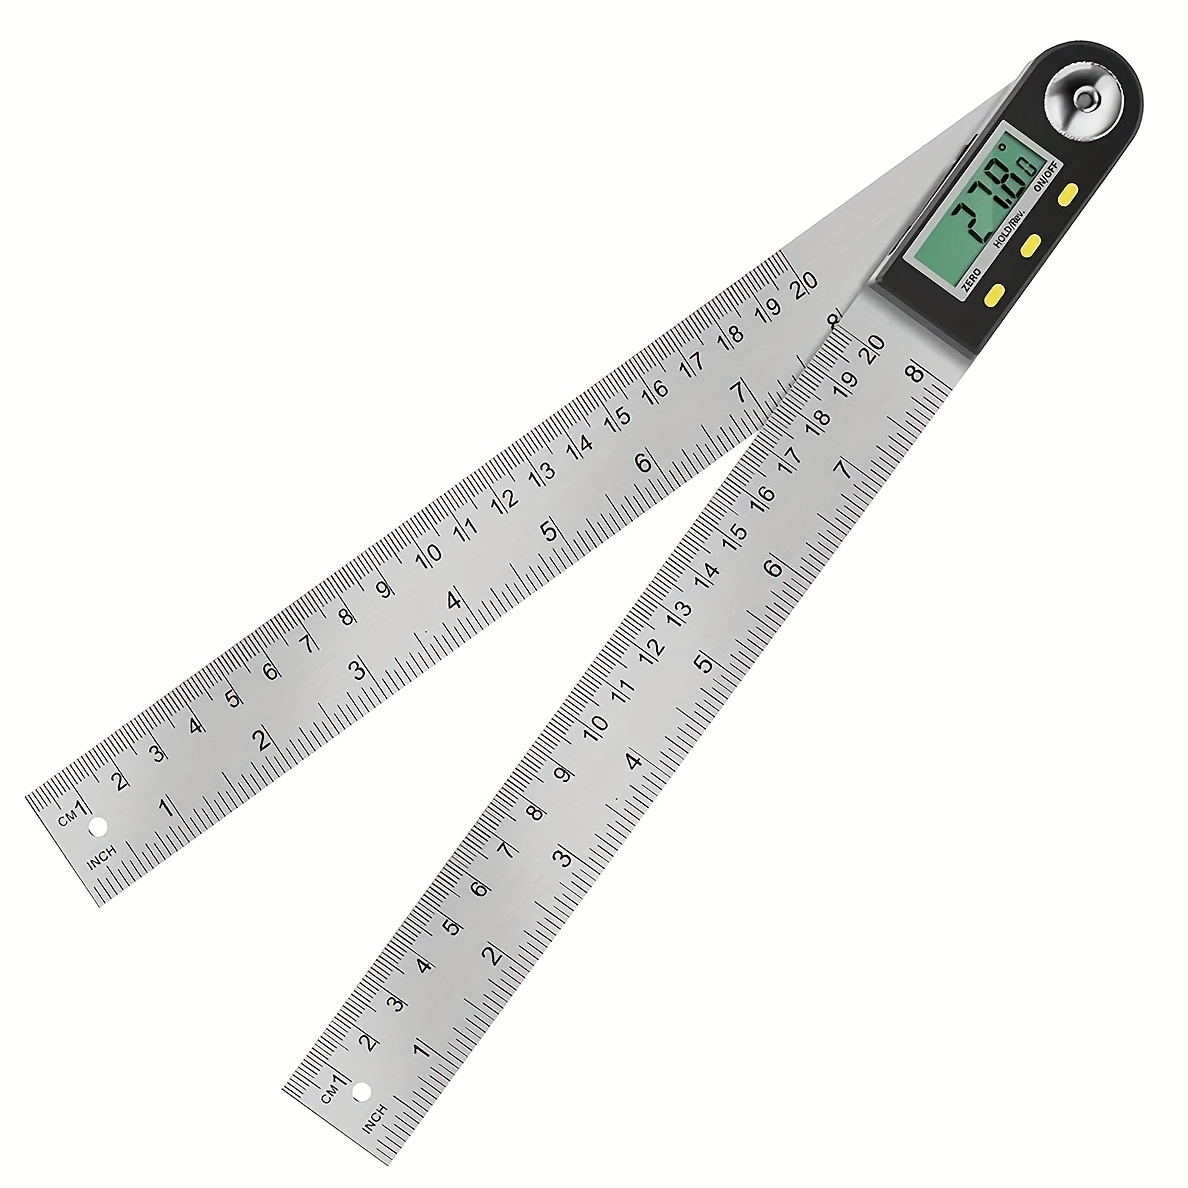 

Stainless Steel Digital Angle Finder Protractor Woodworking Ruler Tool With Large Lcd Display